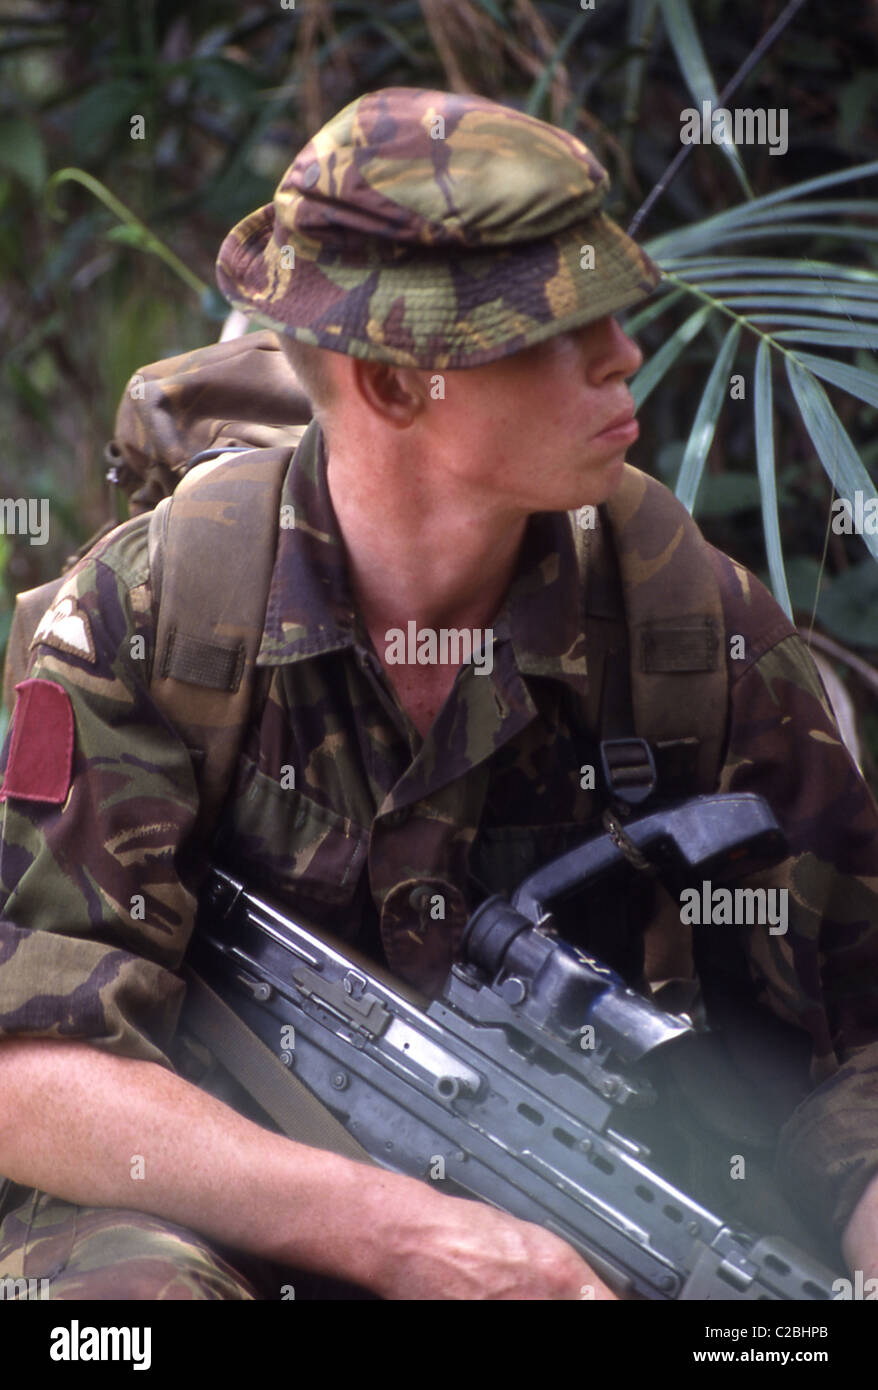 In May 2000, the situation in the country deteriorated to such an extent that British troops were deployed in Operation Palliser Stock Photo